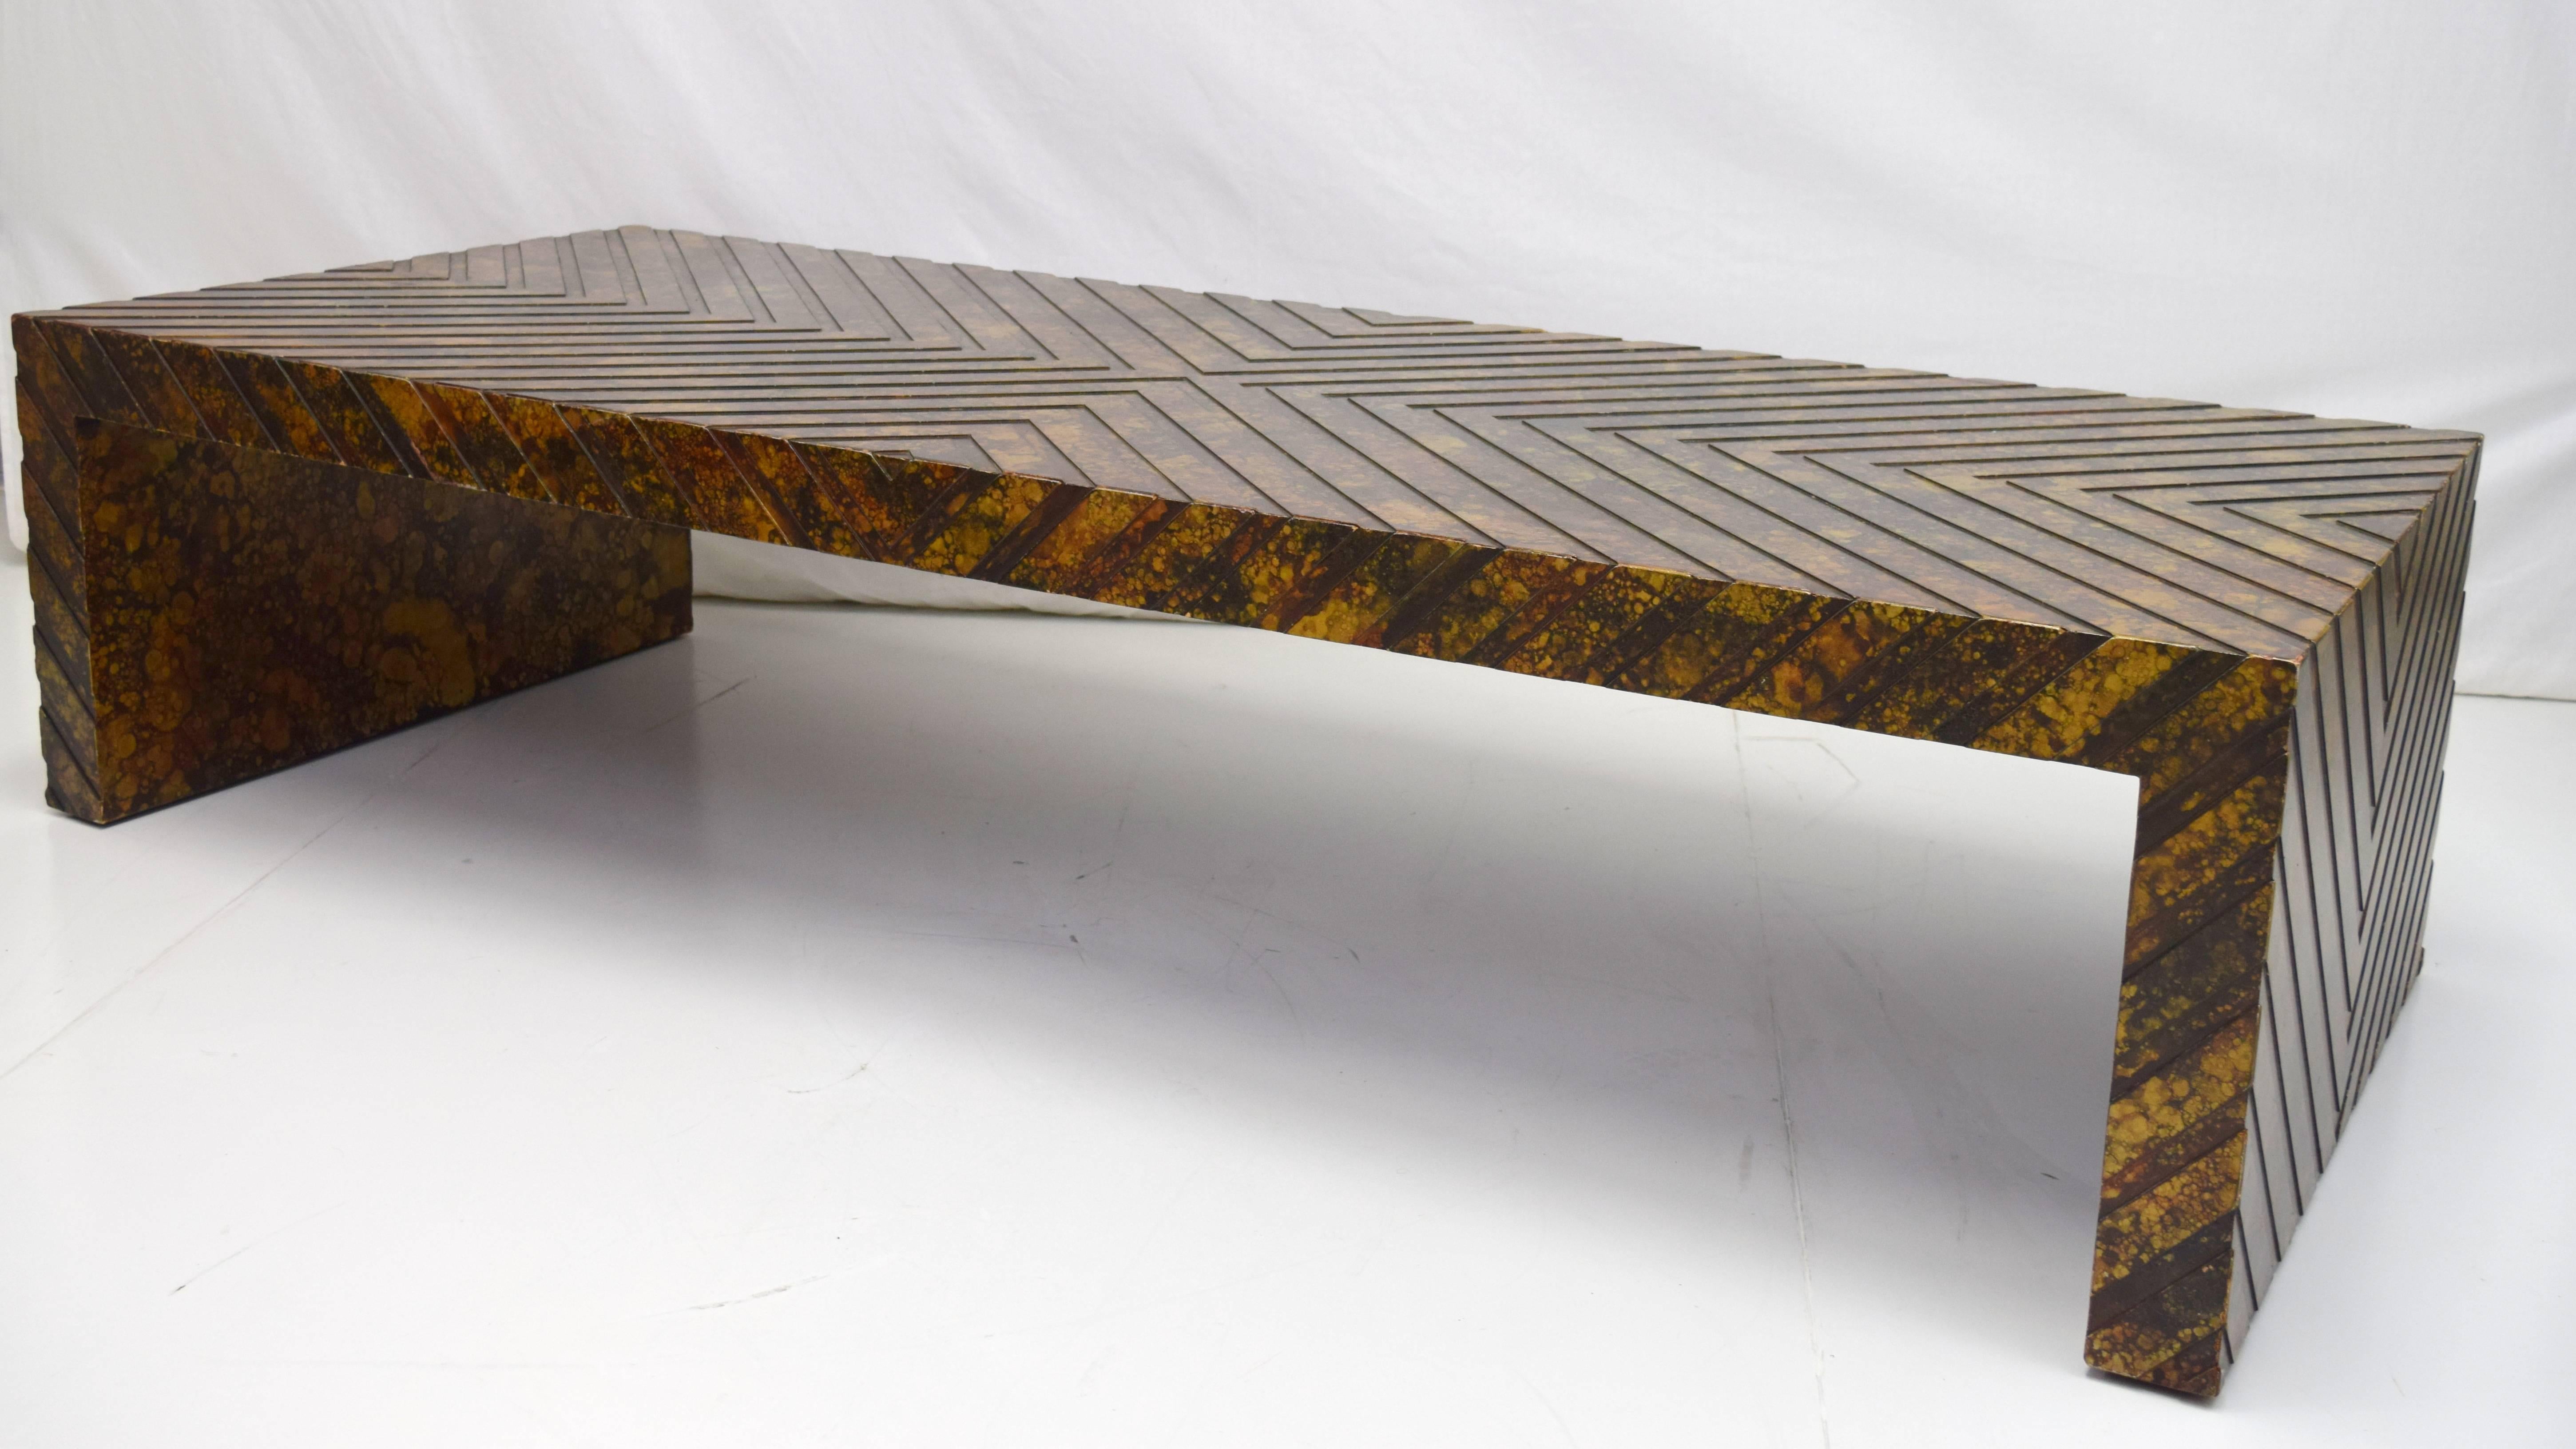 Large-scale chevron patterned cocktail table in oil drop or faux tortoiseshell finish by Phyllis Morris. Nesting footstools with removable vinyl pads in matching finish. Inscribed signature on inside of one leg. Footstool dimensions 21" square